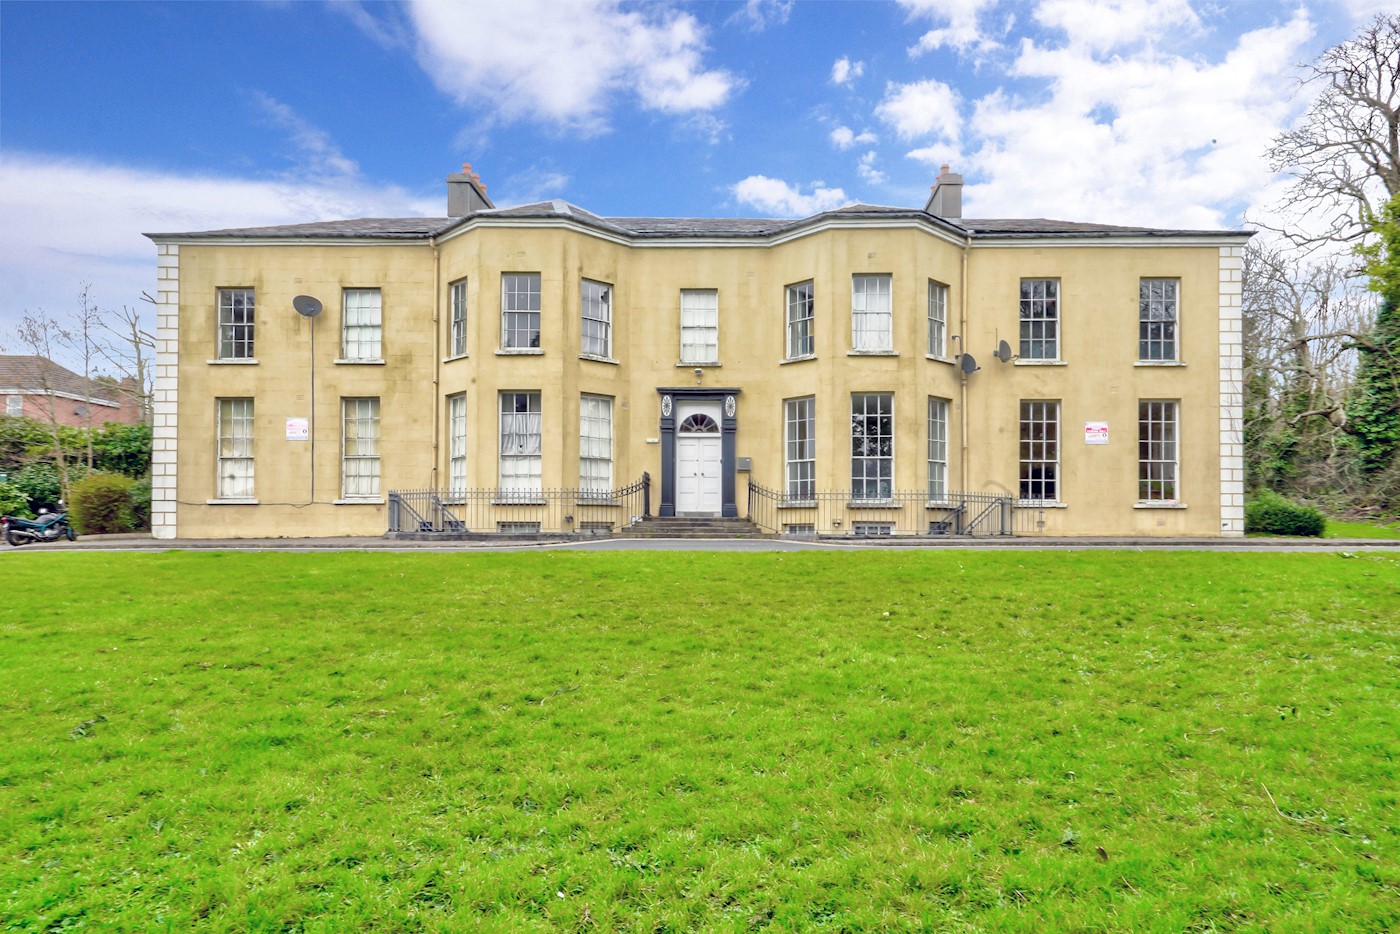 Apartment 8, Old Rockshire House, Rockshire Road, Ferrybank, Co. Waterford, X91 WK19 1/13